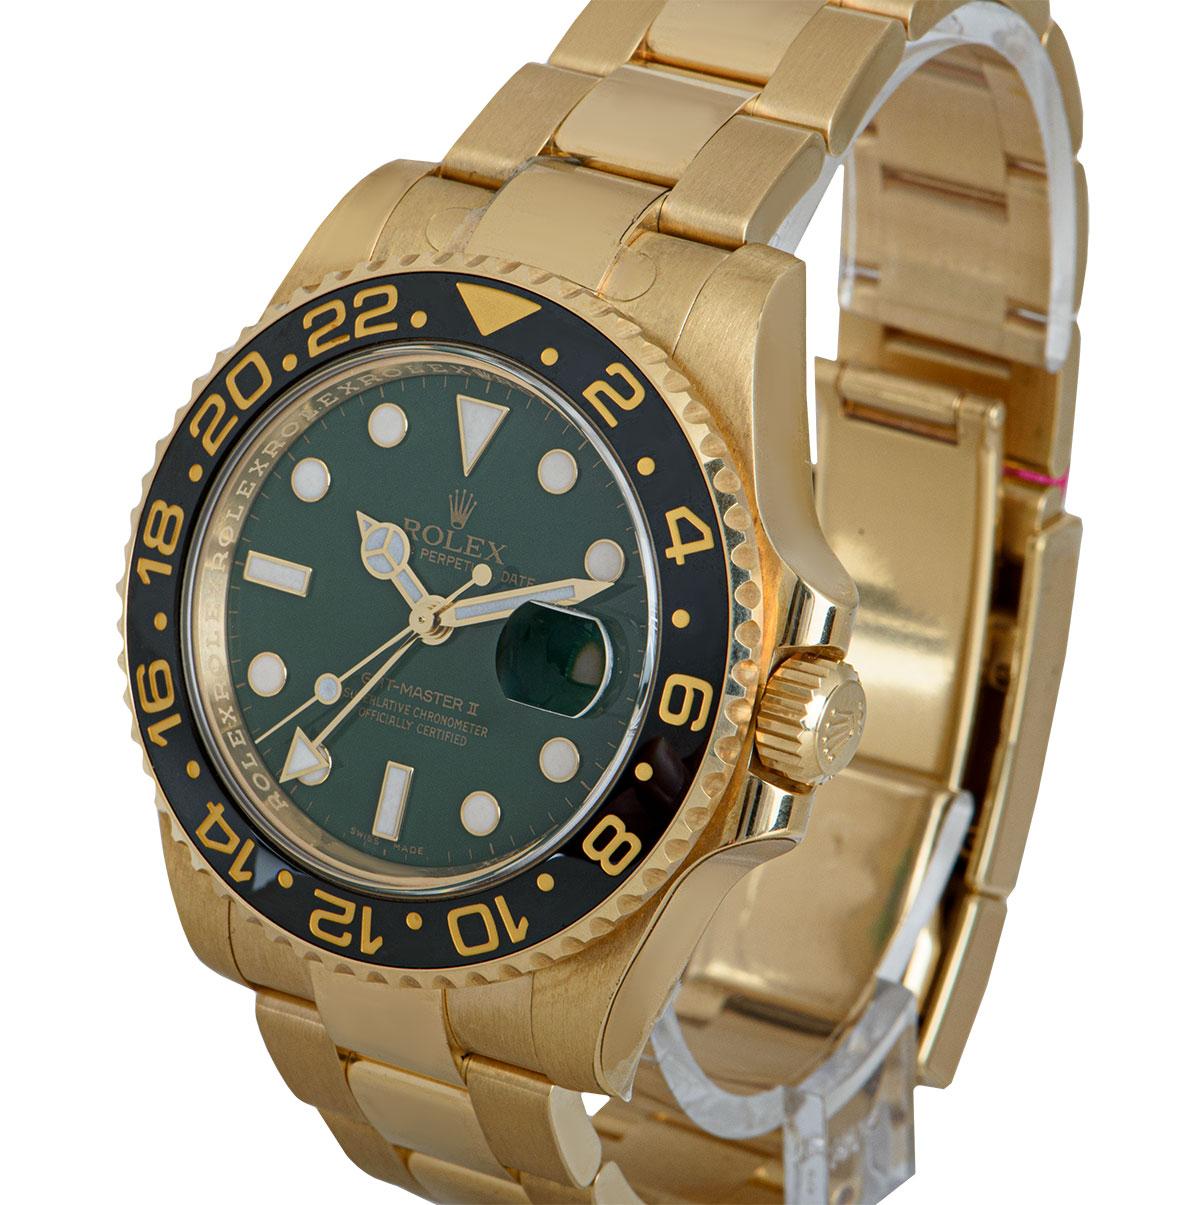 A 40 mm Unworn 18k Yellow Gold Oyster Perpetual GMT-Master II NOS Gents Wristwatch, green dial with applied hour markers, date at 3 0'clock, an 18k yellow gold bi-directional rotatatable 24 hour bezel with a black ceramic bezel insert, an 18k yellow